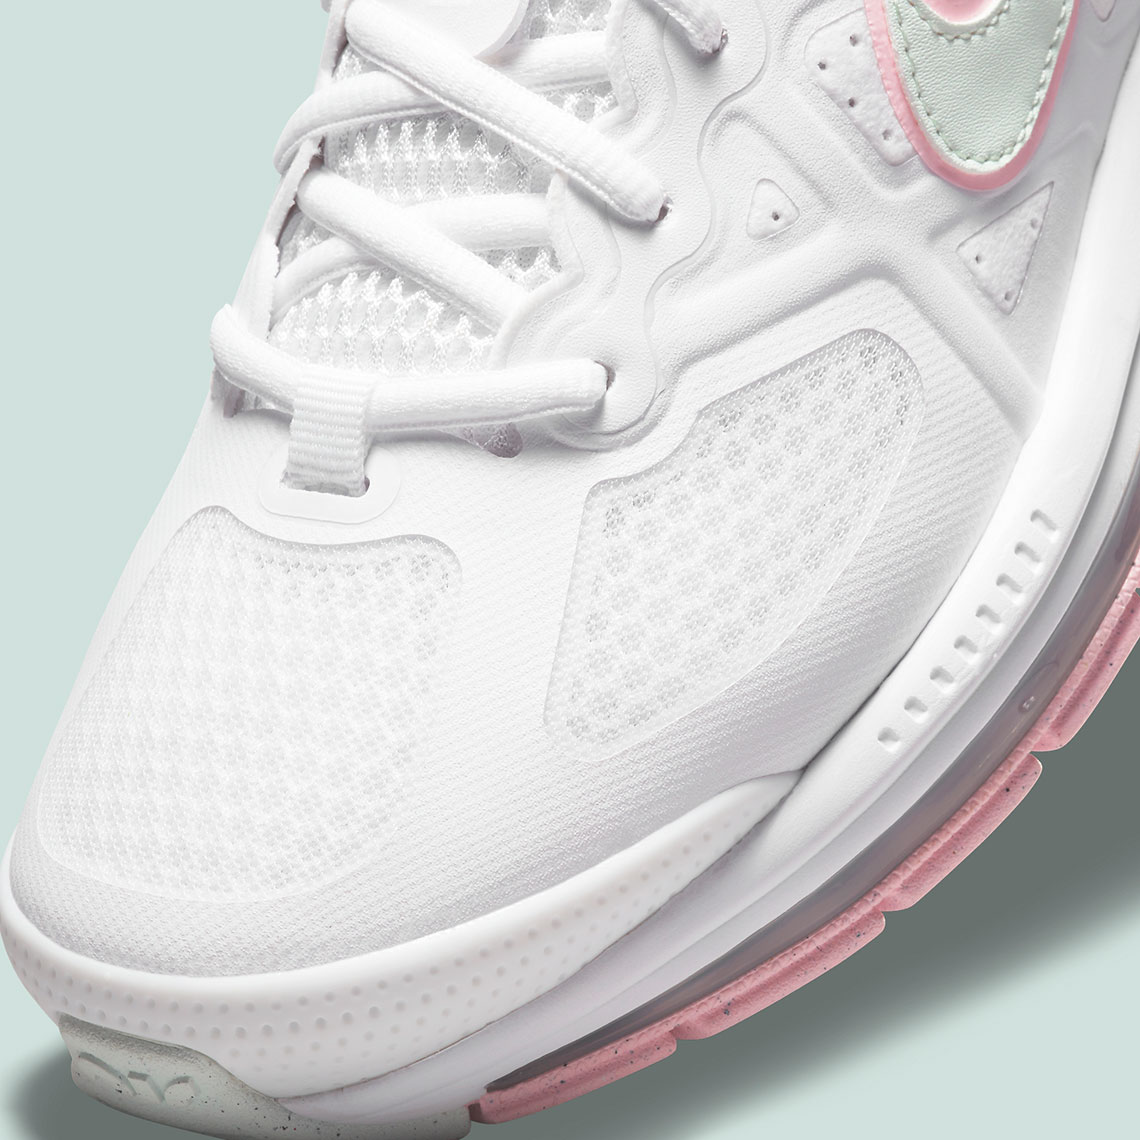 Air Max Genome Wmns White Barely Green Arctic Punch Dj1547 100 1